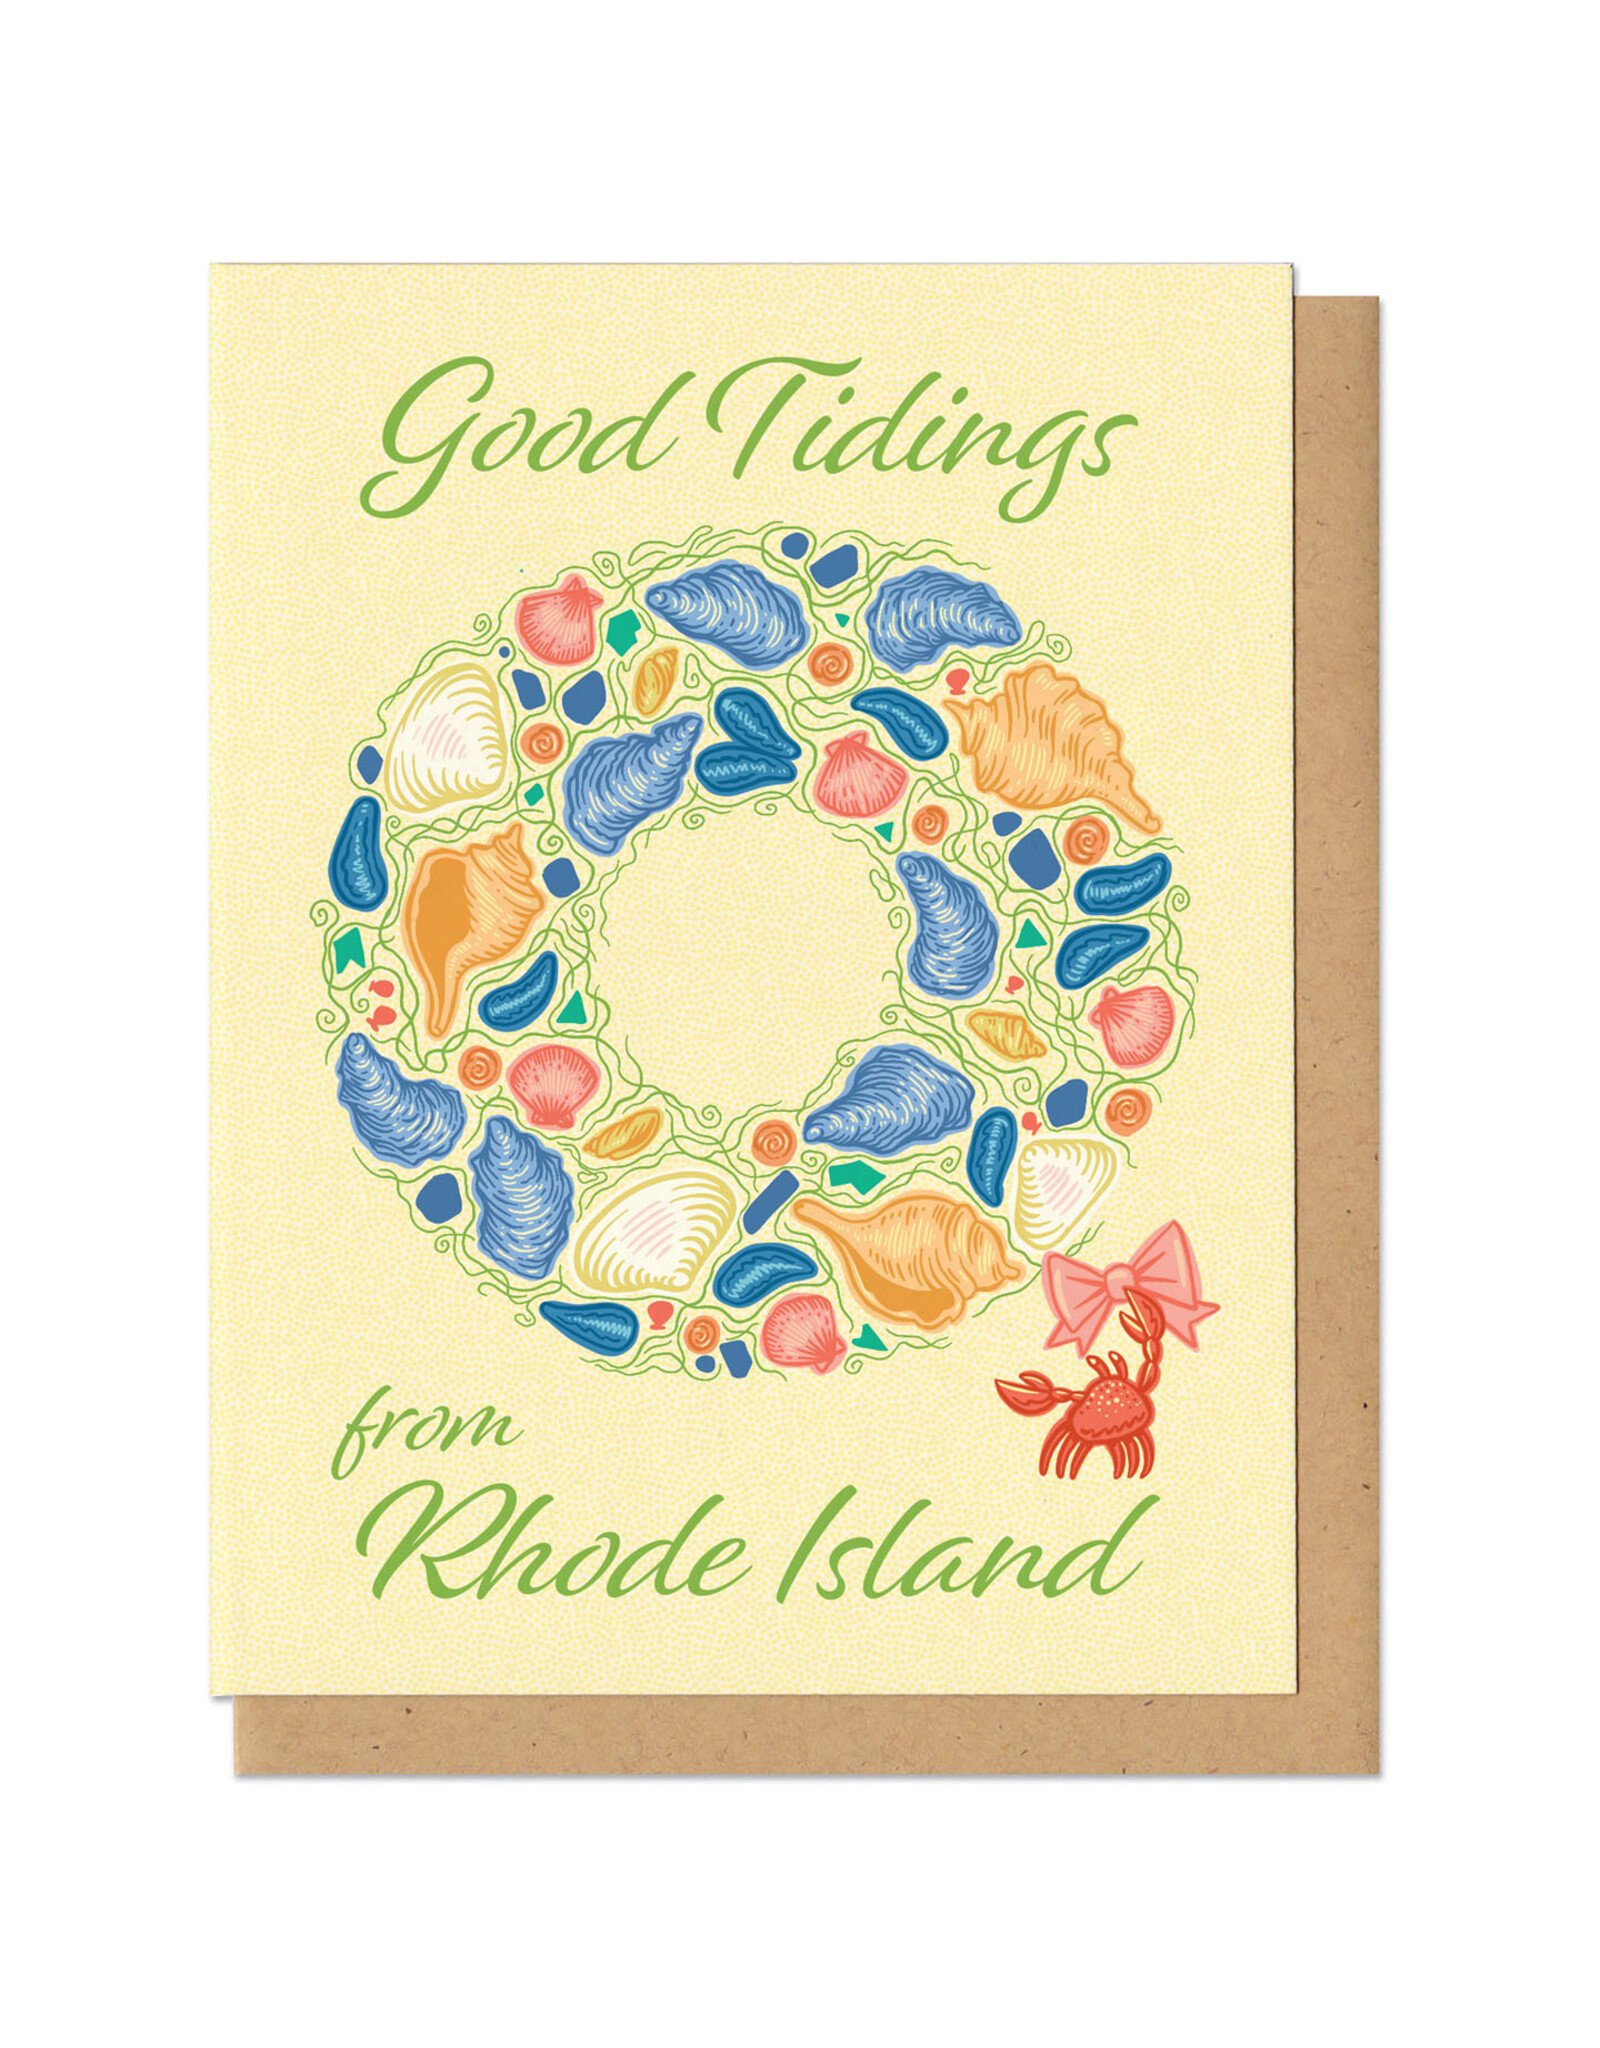 Good Tidings from Rhode Island Greeting Card